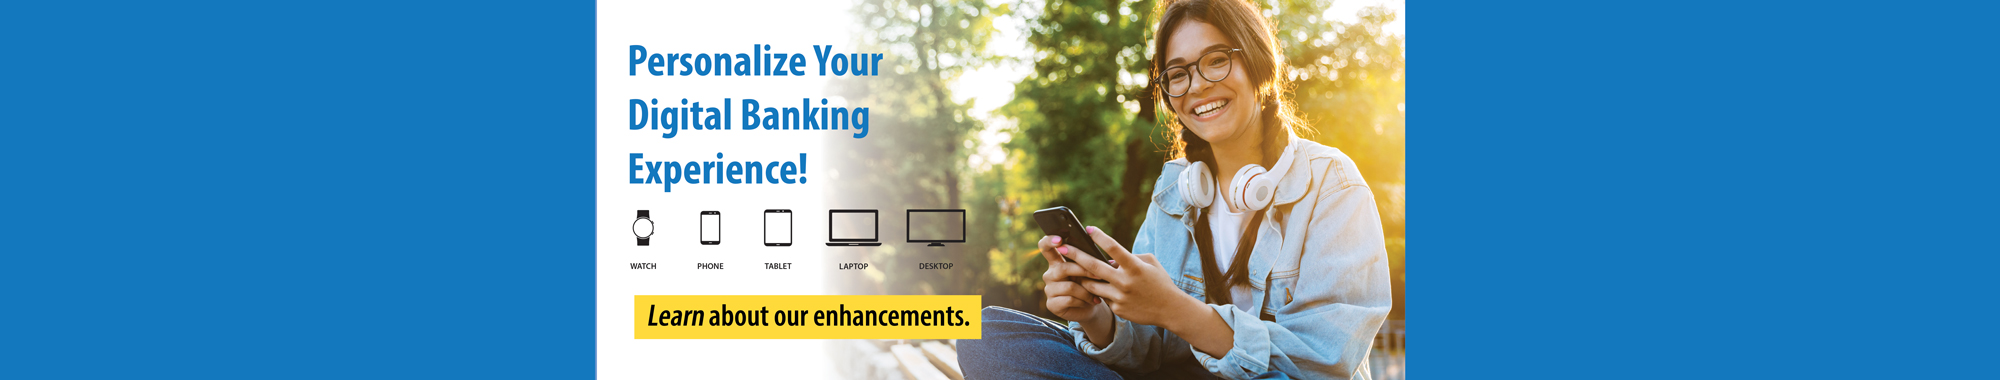 Personalize Your Digital Banking Experience! Learn about our enhancements.